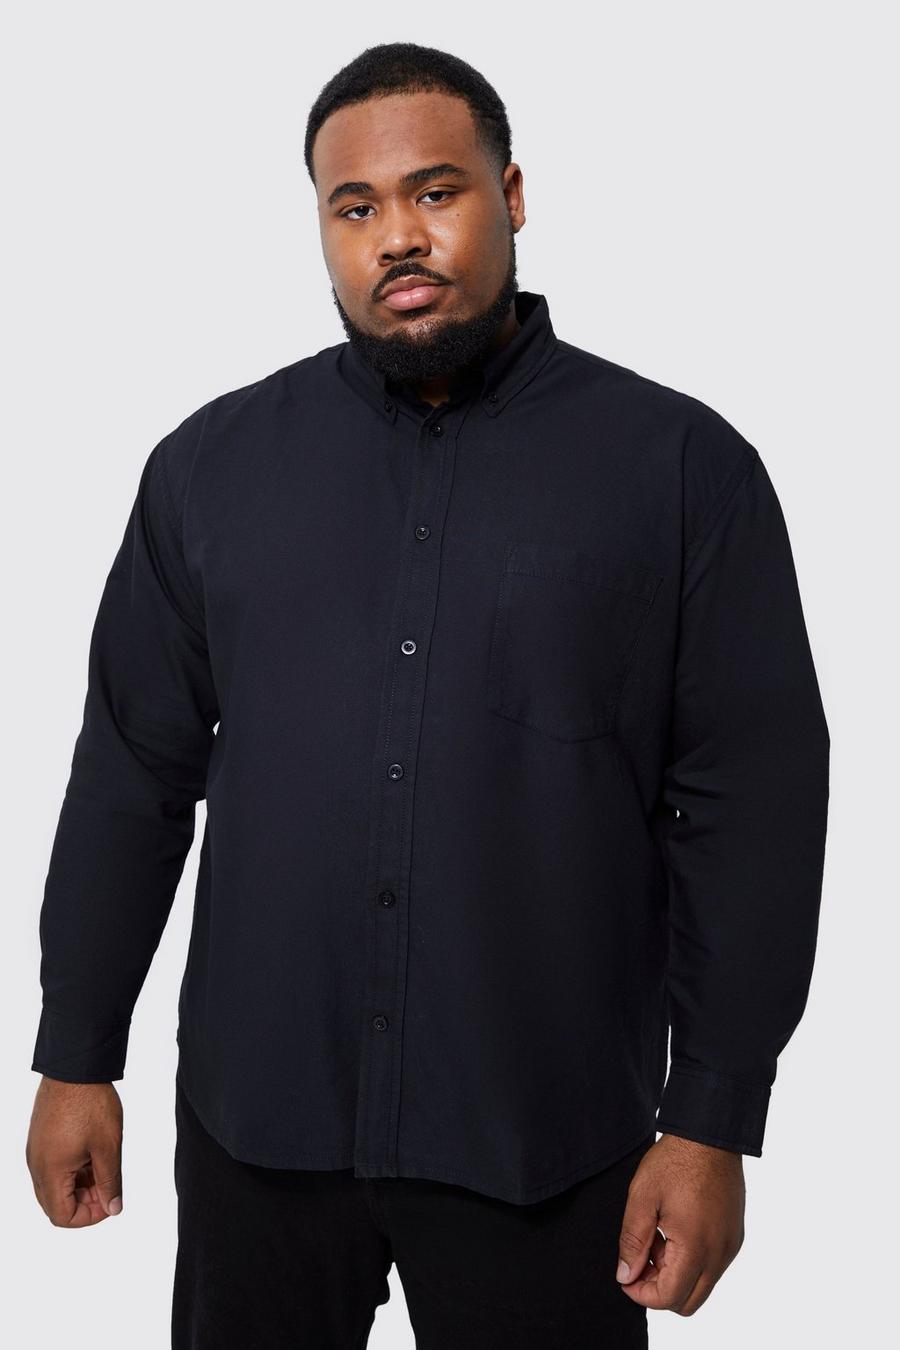 Black noir Plus Relaxed Fit Long Sleeve Oxford Shirt 